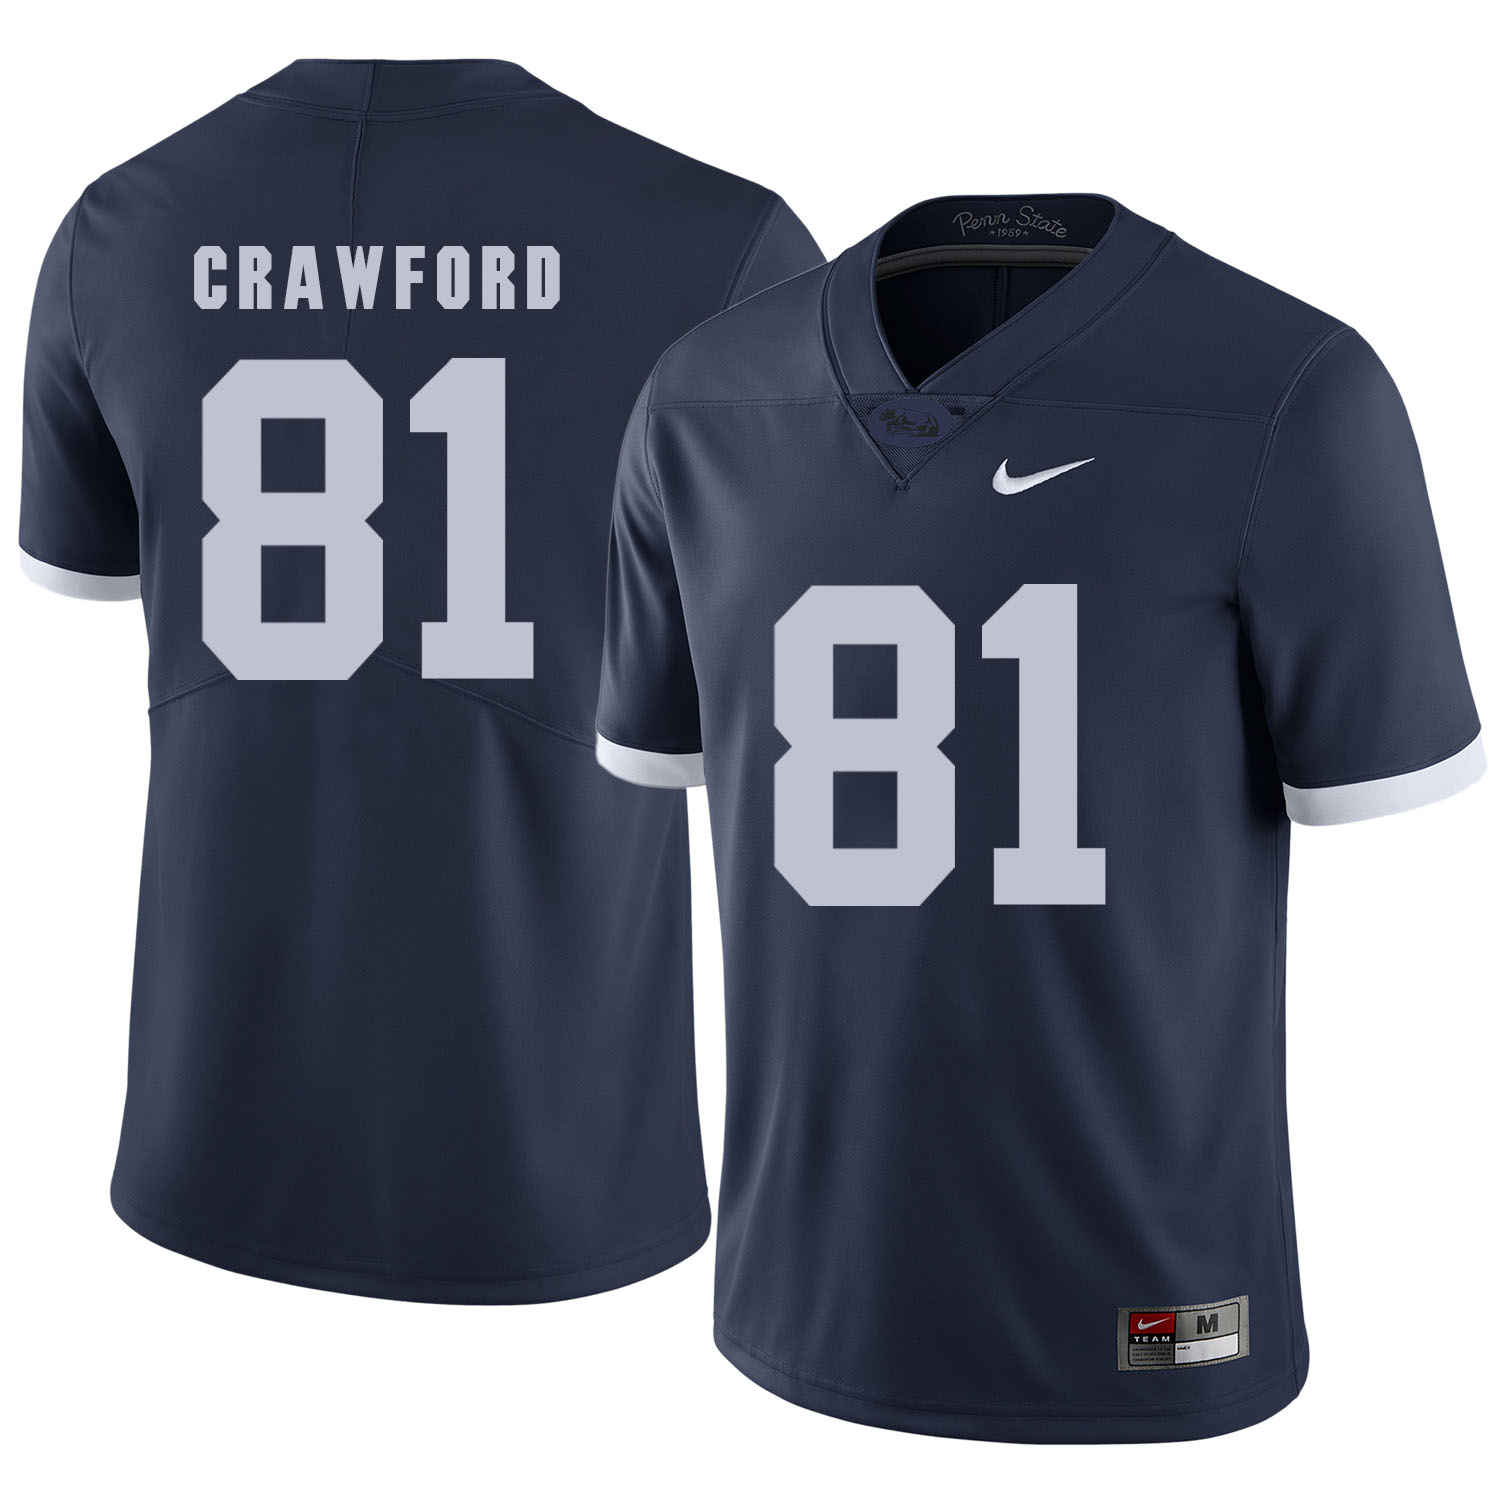 Penn State Nittany Lions 81 Jack Crawford Navy College Football Jersey